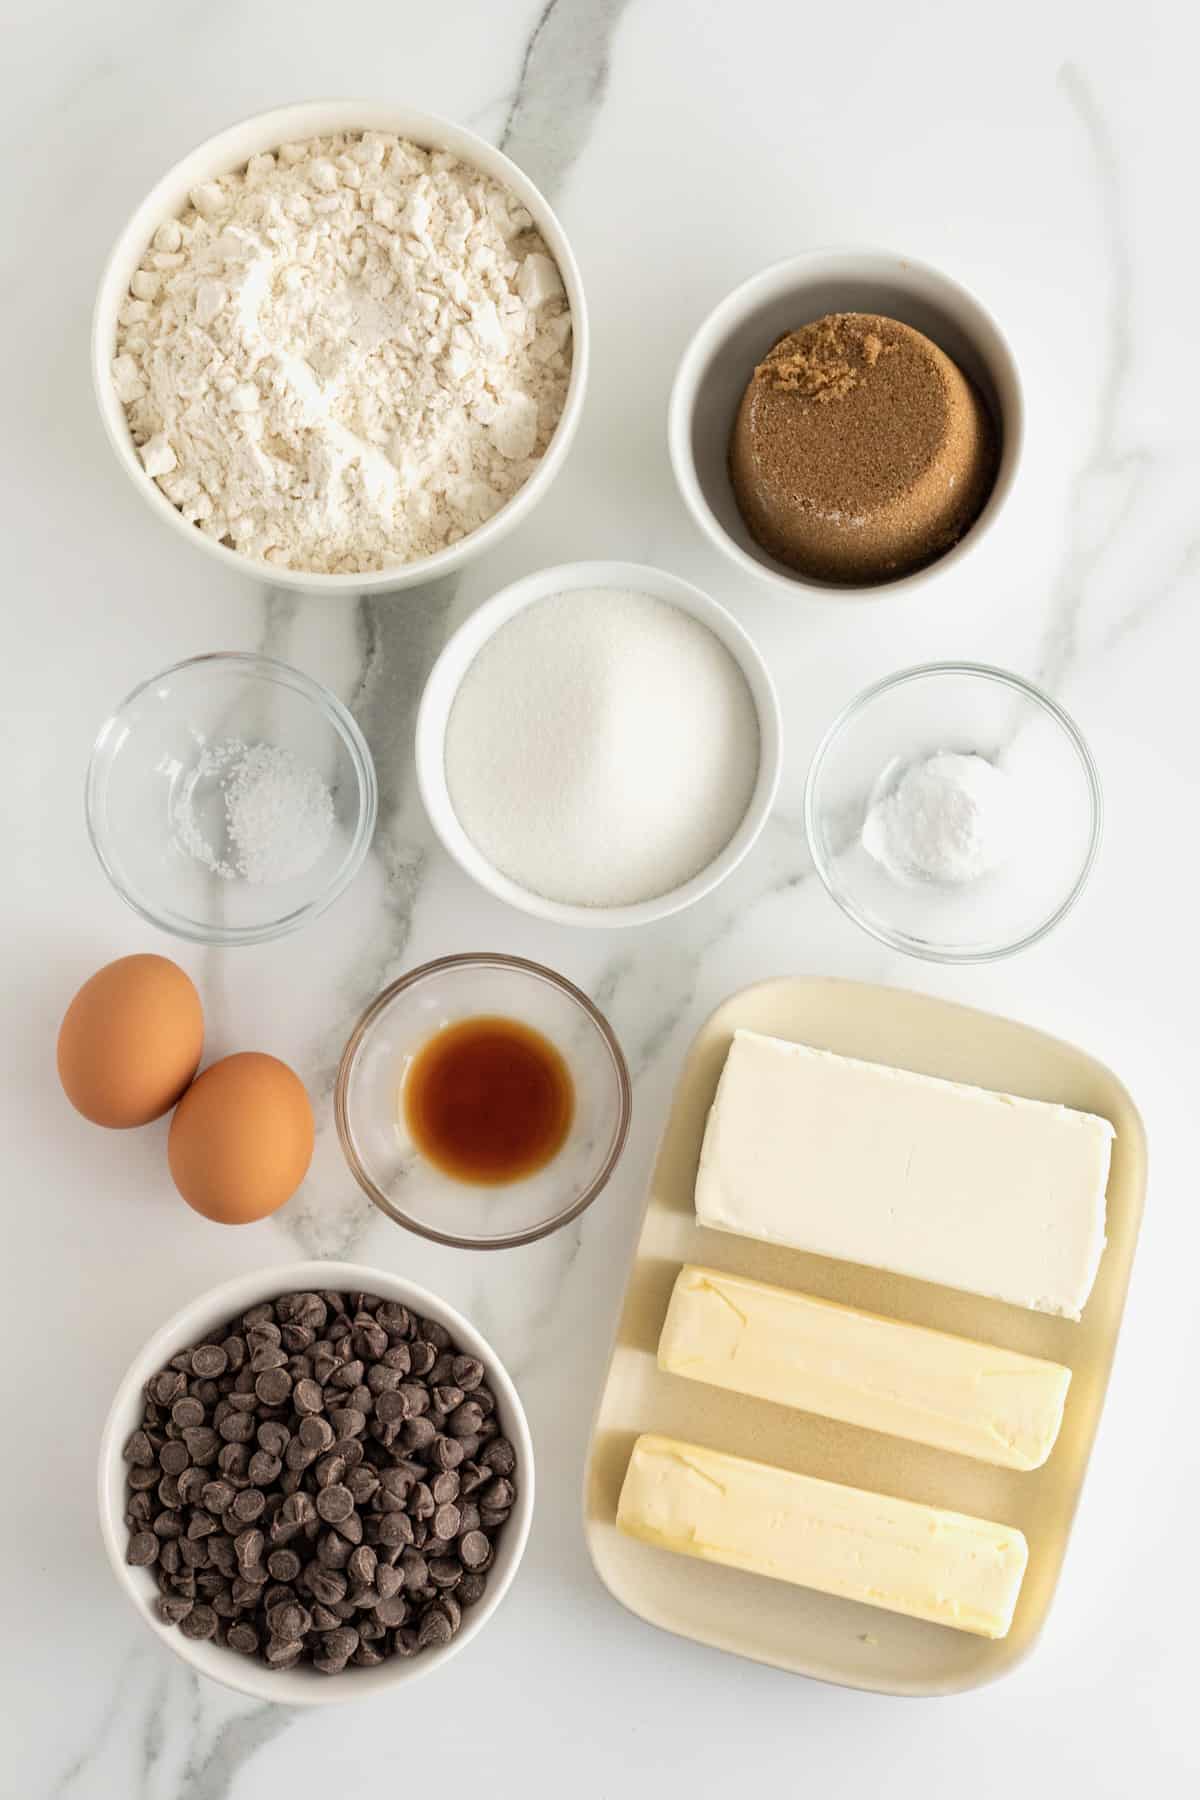 Ingredients for Sheet Pan Chocolate Chip Cookie Bars by The BakerMama